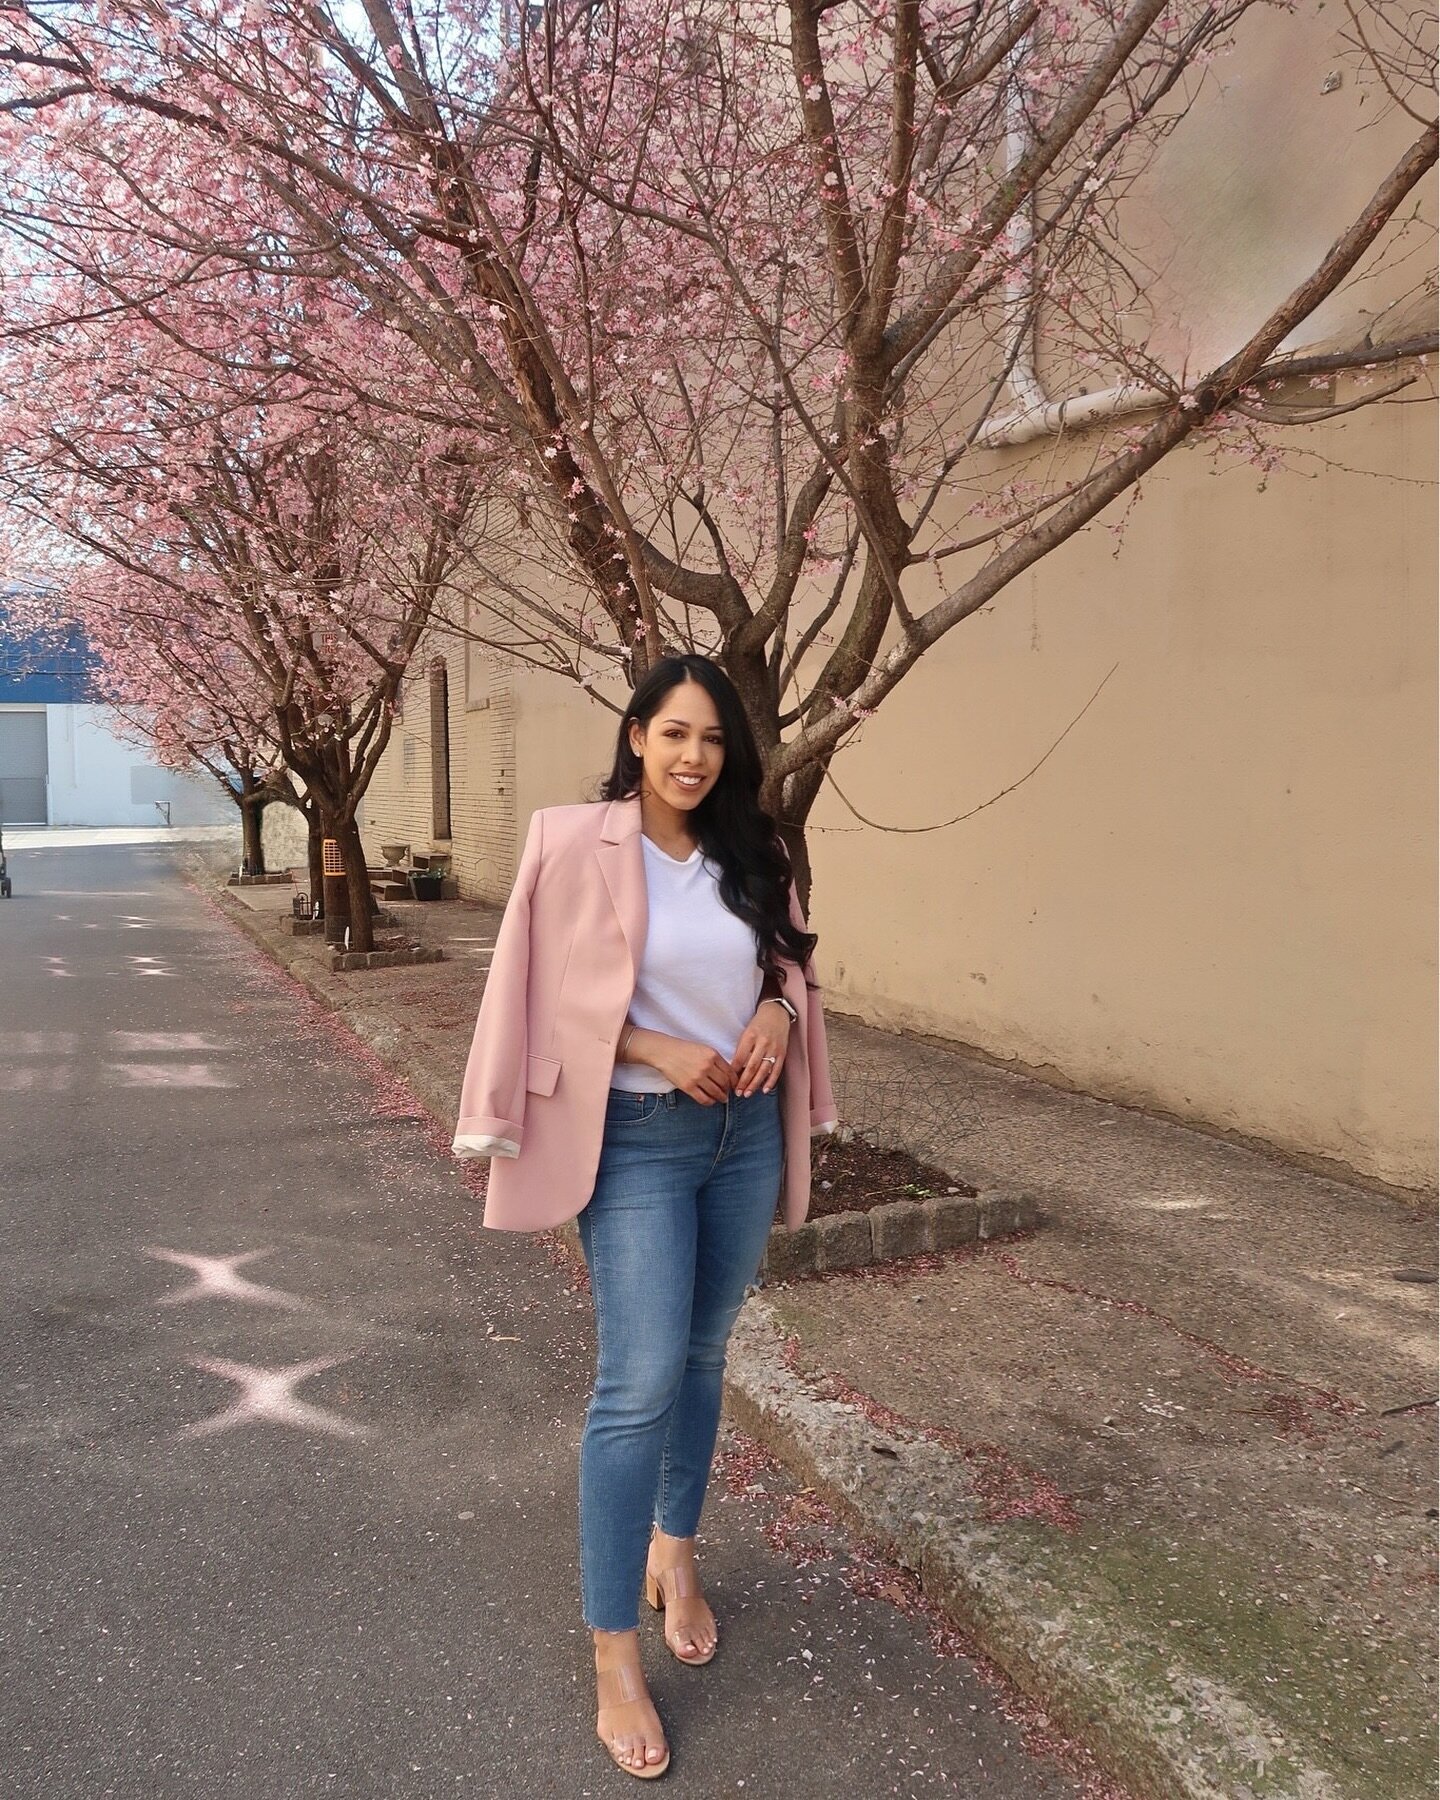 Lifes a cherry blossom, make it bloom 🌸 

Follow my shop @mygoldenbeauty on the @shop.LTK app to shop this post and get my exclusive app-only content! #liketkit #LTKstyletip #LTKtravel #LTKSeasonal https://liketk.it/4AXkq

cherry blossom, pink blaze